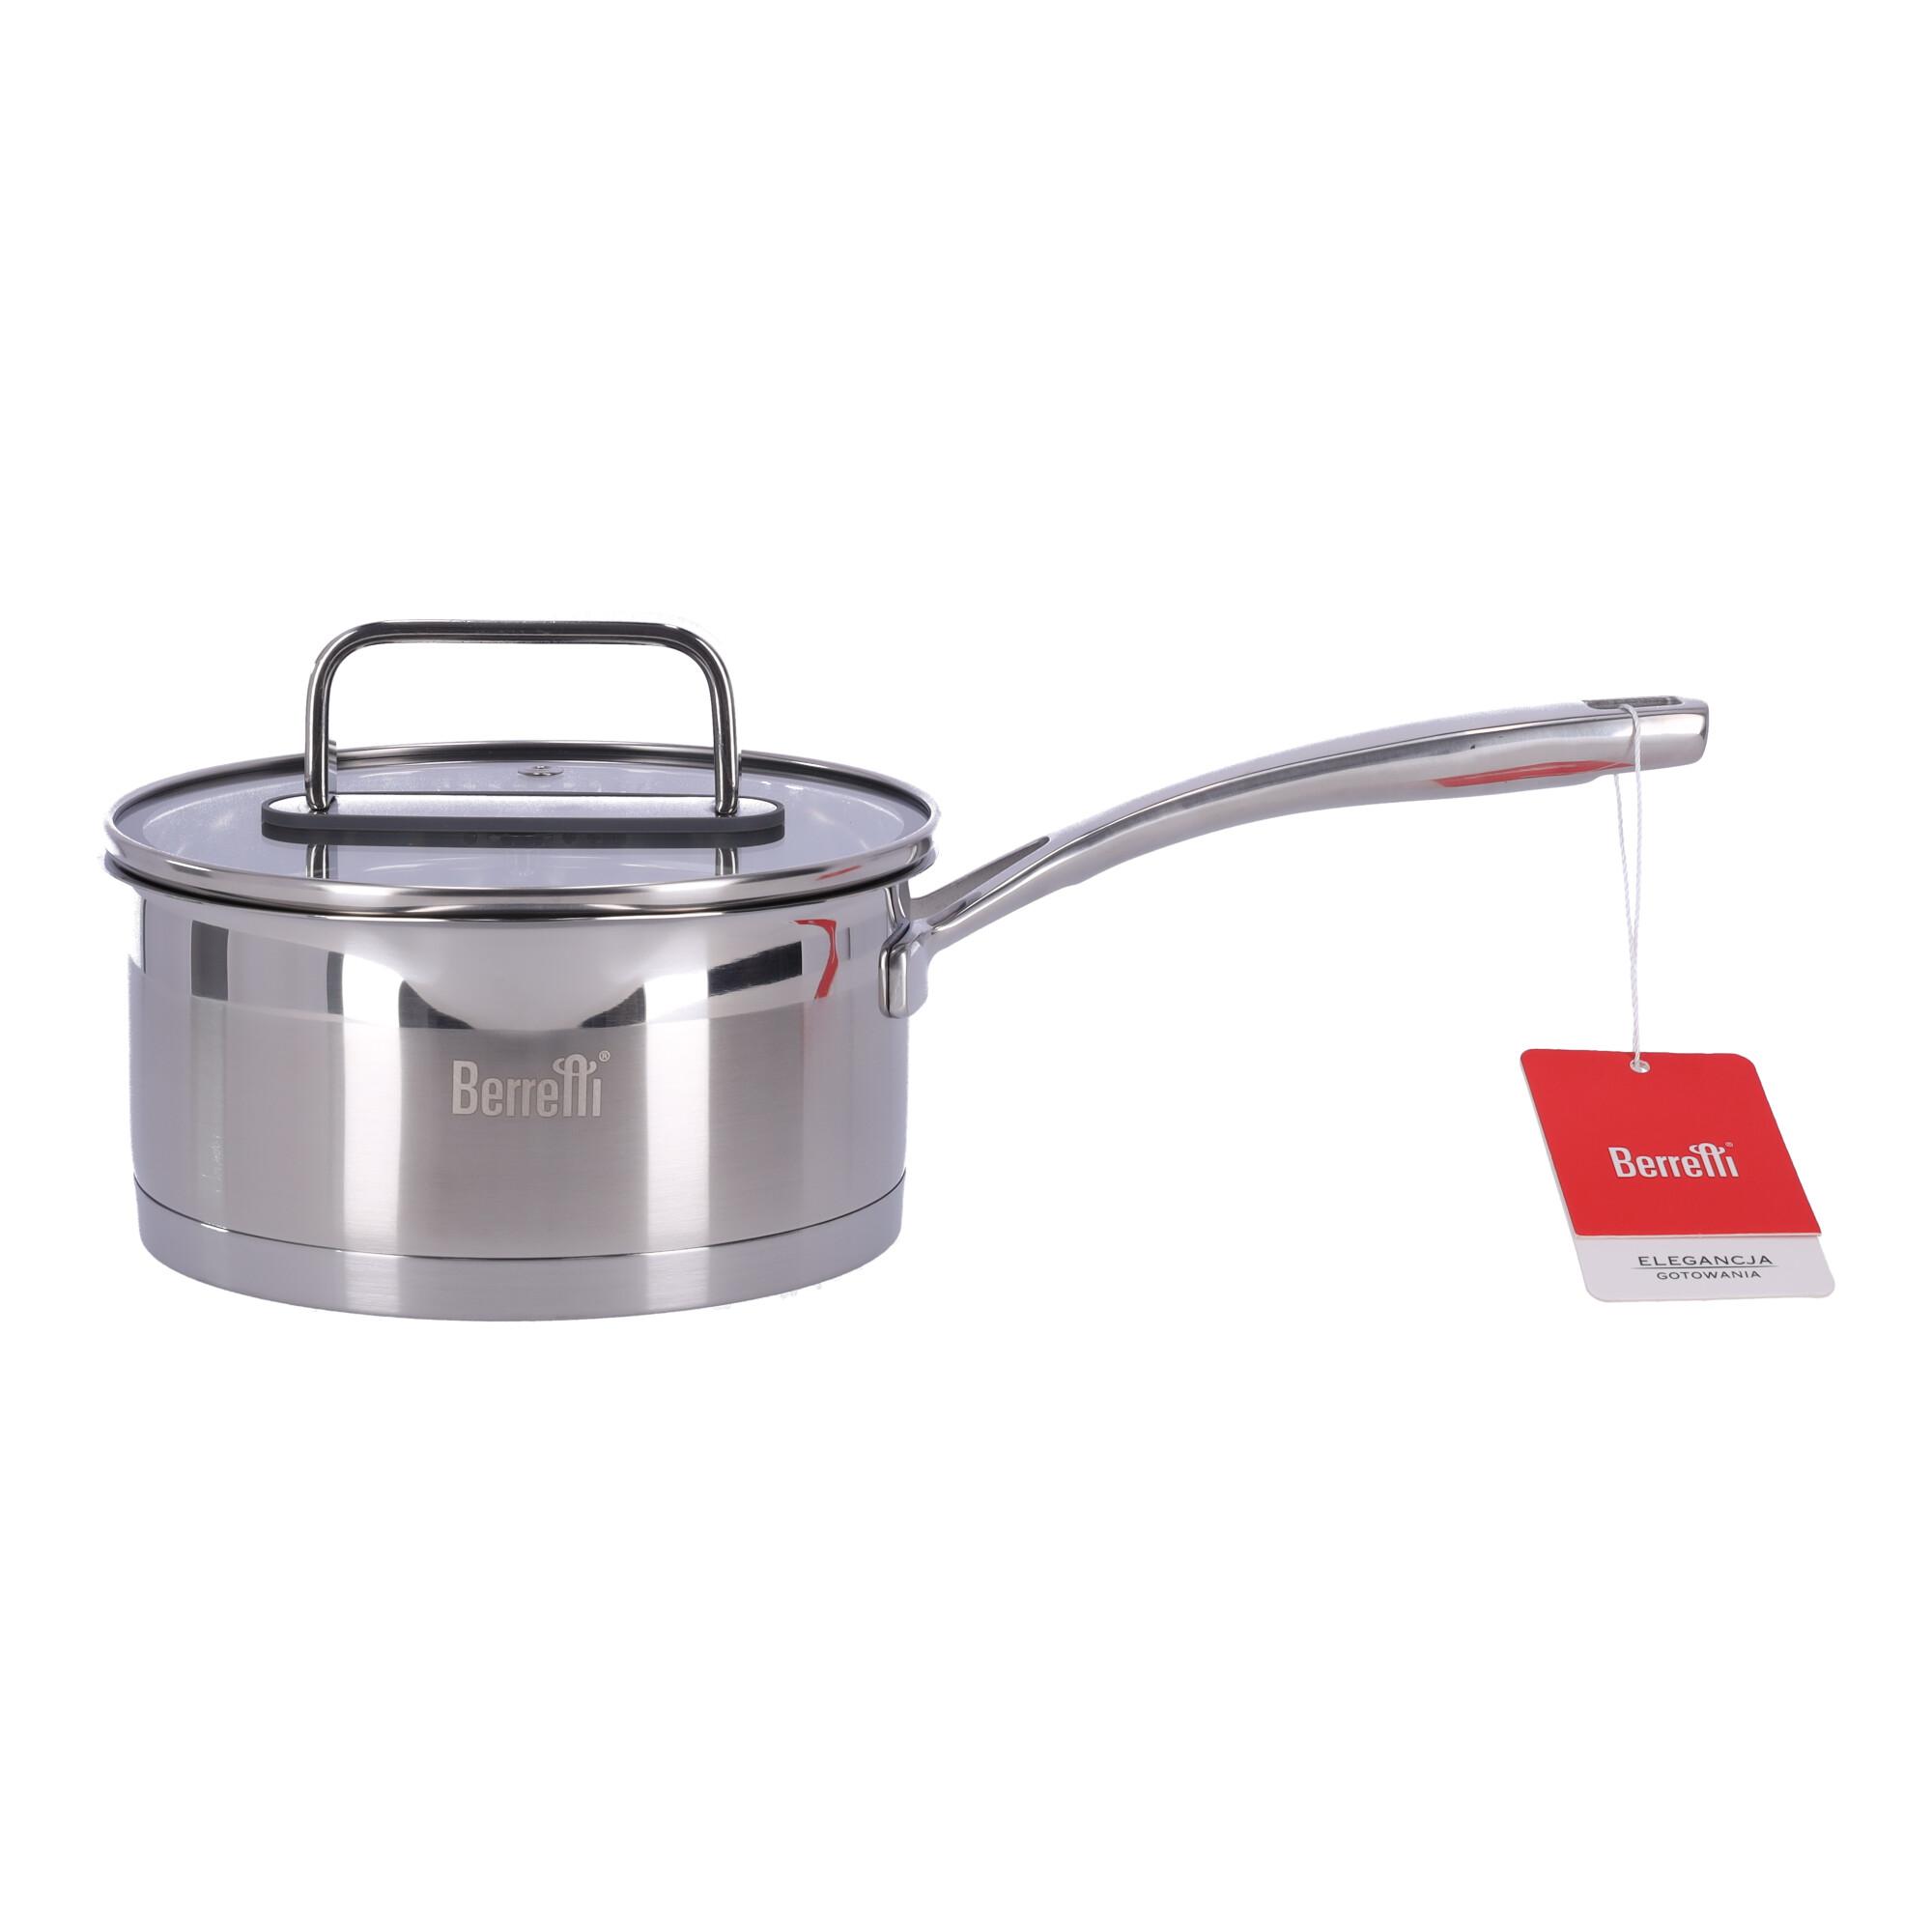 Stainless steel saucepan with lid Mistral BERRETTI, 16 cm